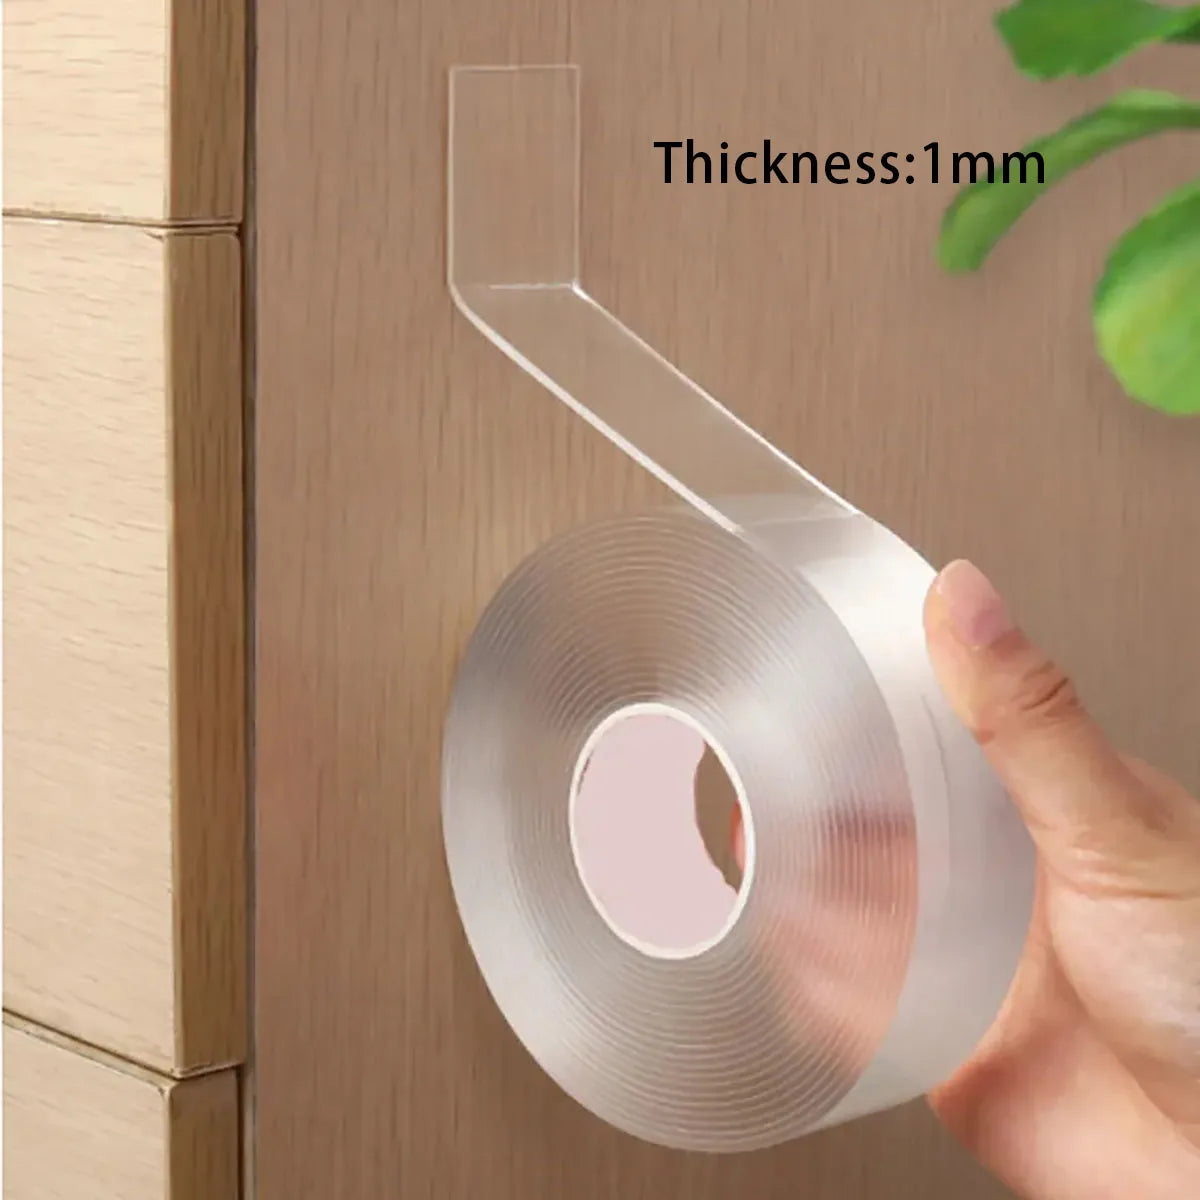 Ultra-Strong Double-Sided Adhesive Monster Tape: Waterproof Wall Stickers for Home Improvement